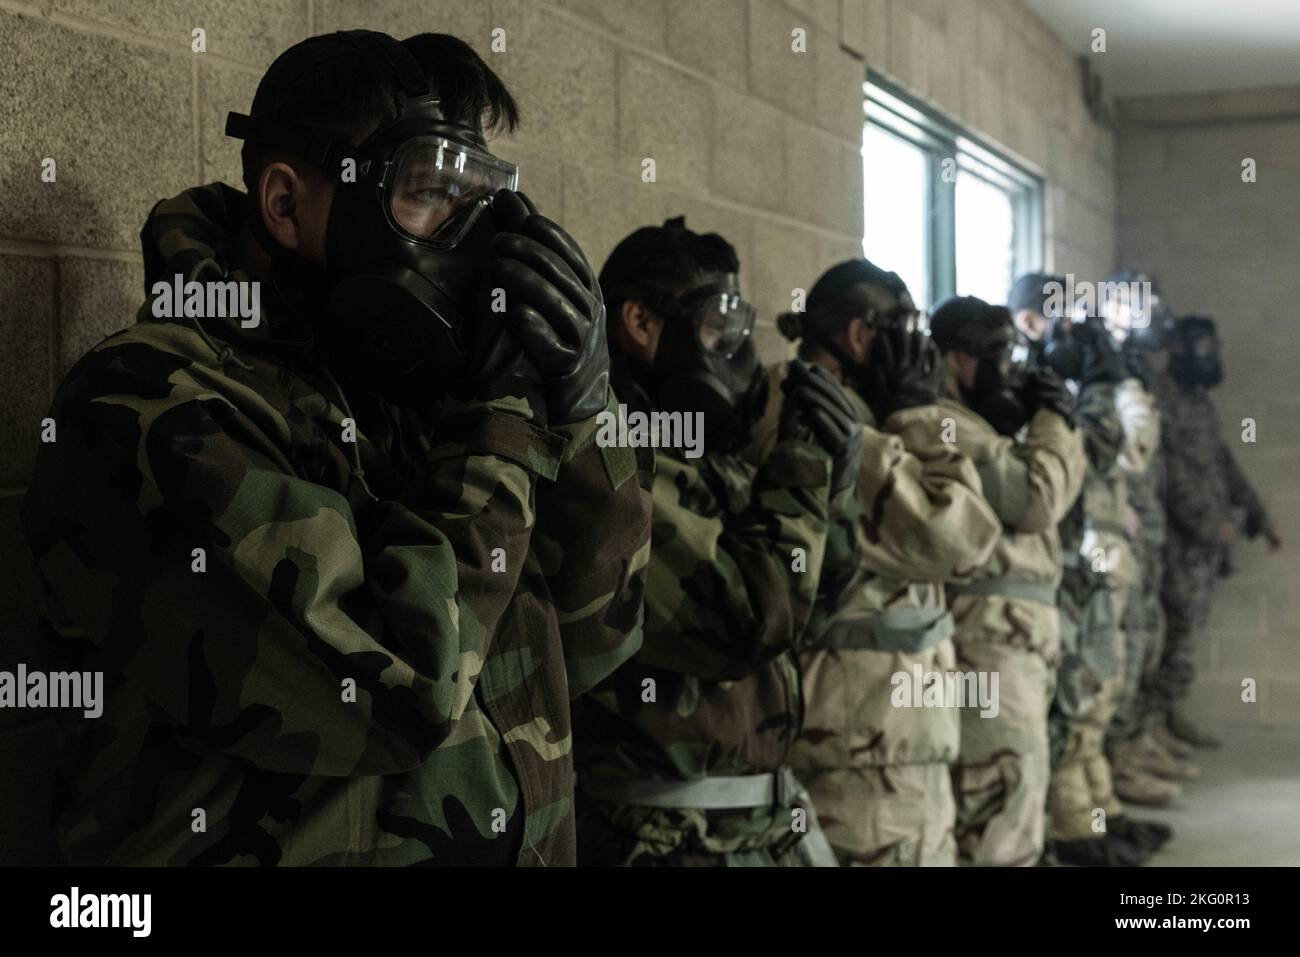 U.S. Marines with Headquarters Battalion, 1st Marine Division, clear their masks of chlorobenzalmalononitrile gas, commonly known as CS gas, during chemical, biological, radiological and nuclear defense training at Marine Corps Base Camp Pendleton, California, Oct. 20, 2022. CBRN training is conducted annually to ensure Marines know how to use their protective gear in the event of a chemical attack. Stock Photo